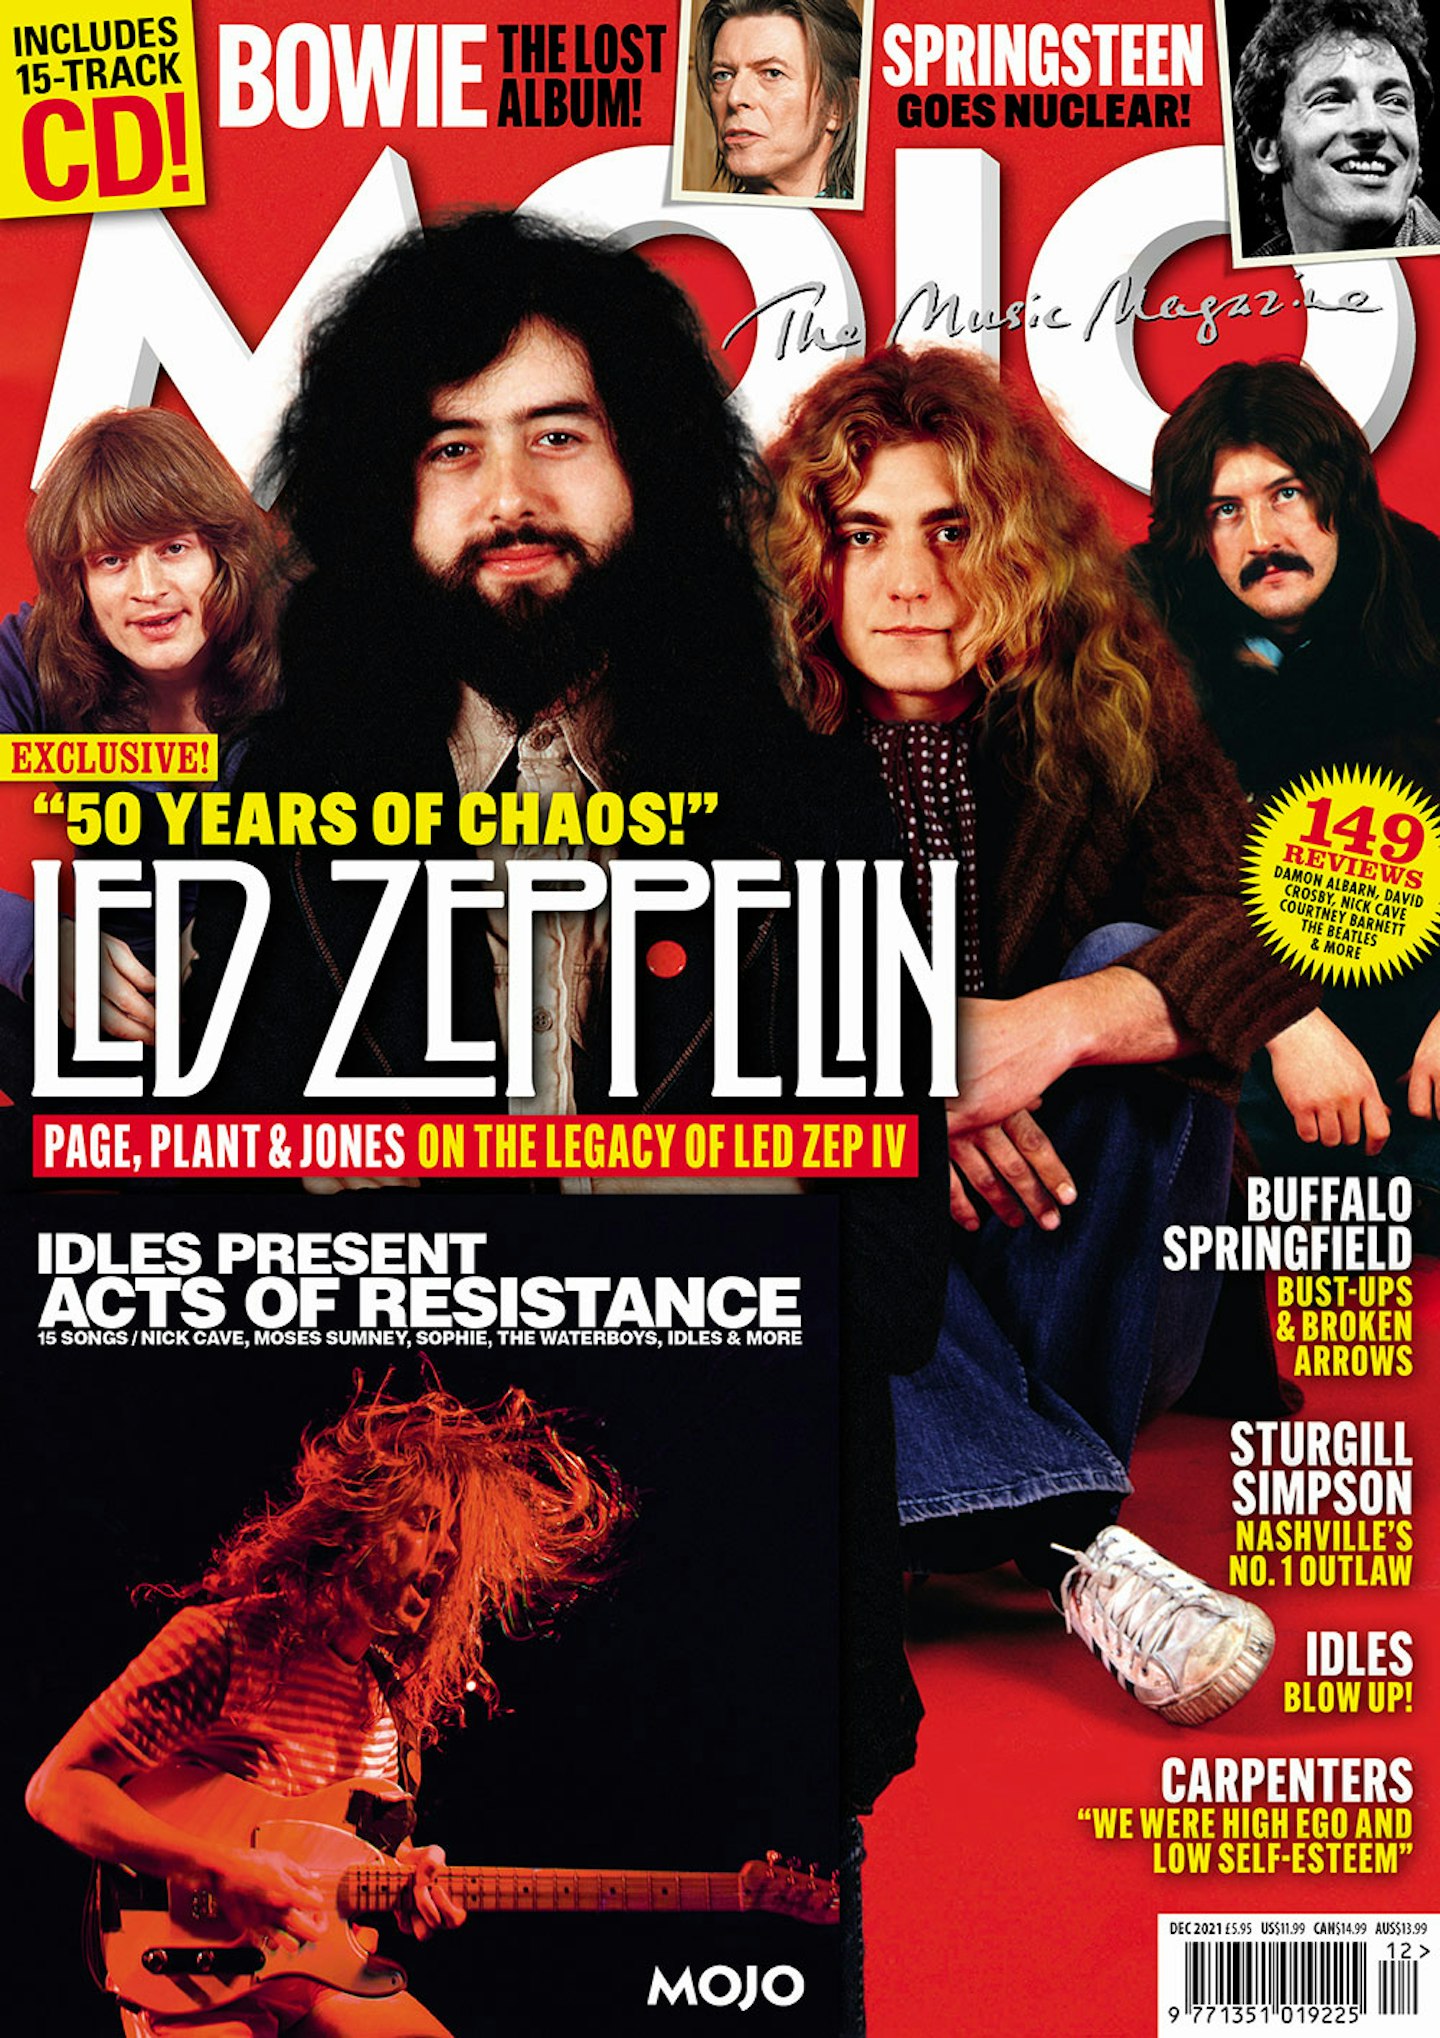 MOJO 337 cover – features Led Zeppelin, Bowie, Springsteen and more